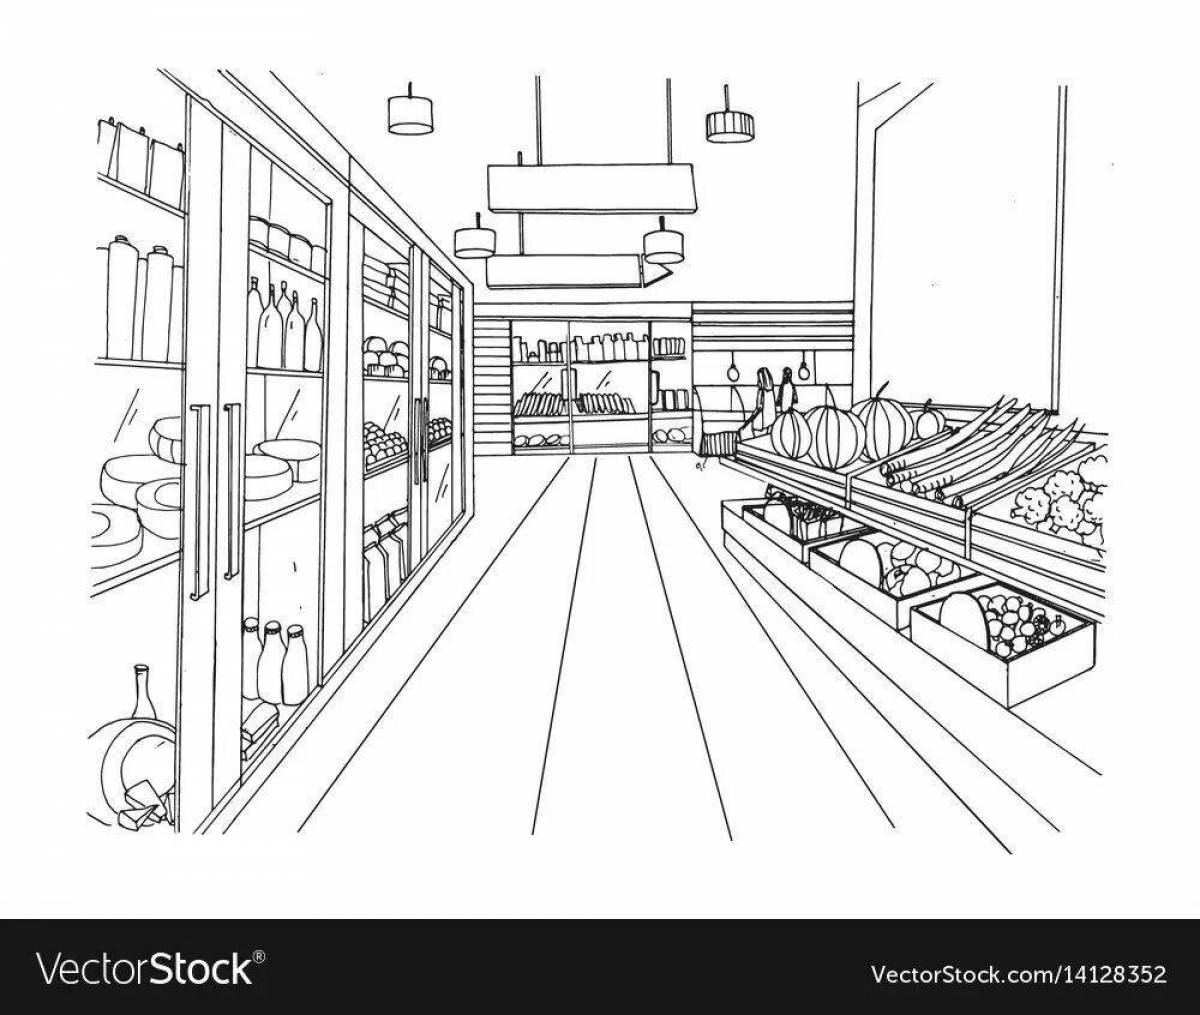 Creative grocery store coloring for kids